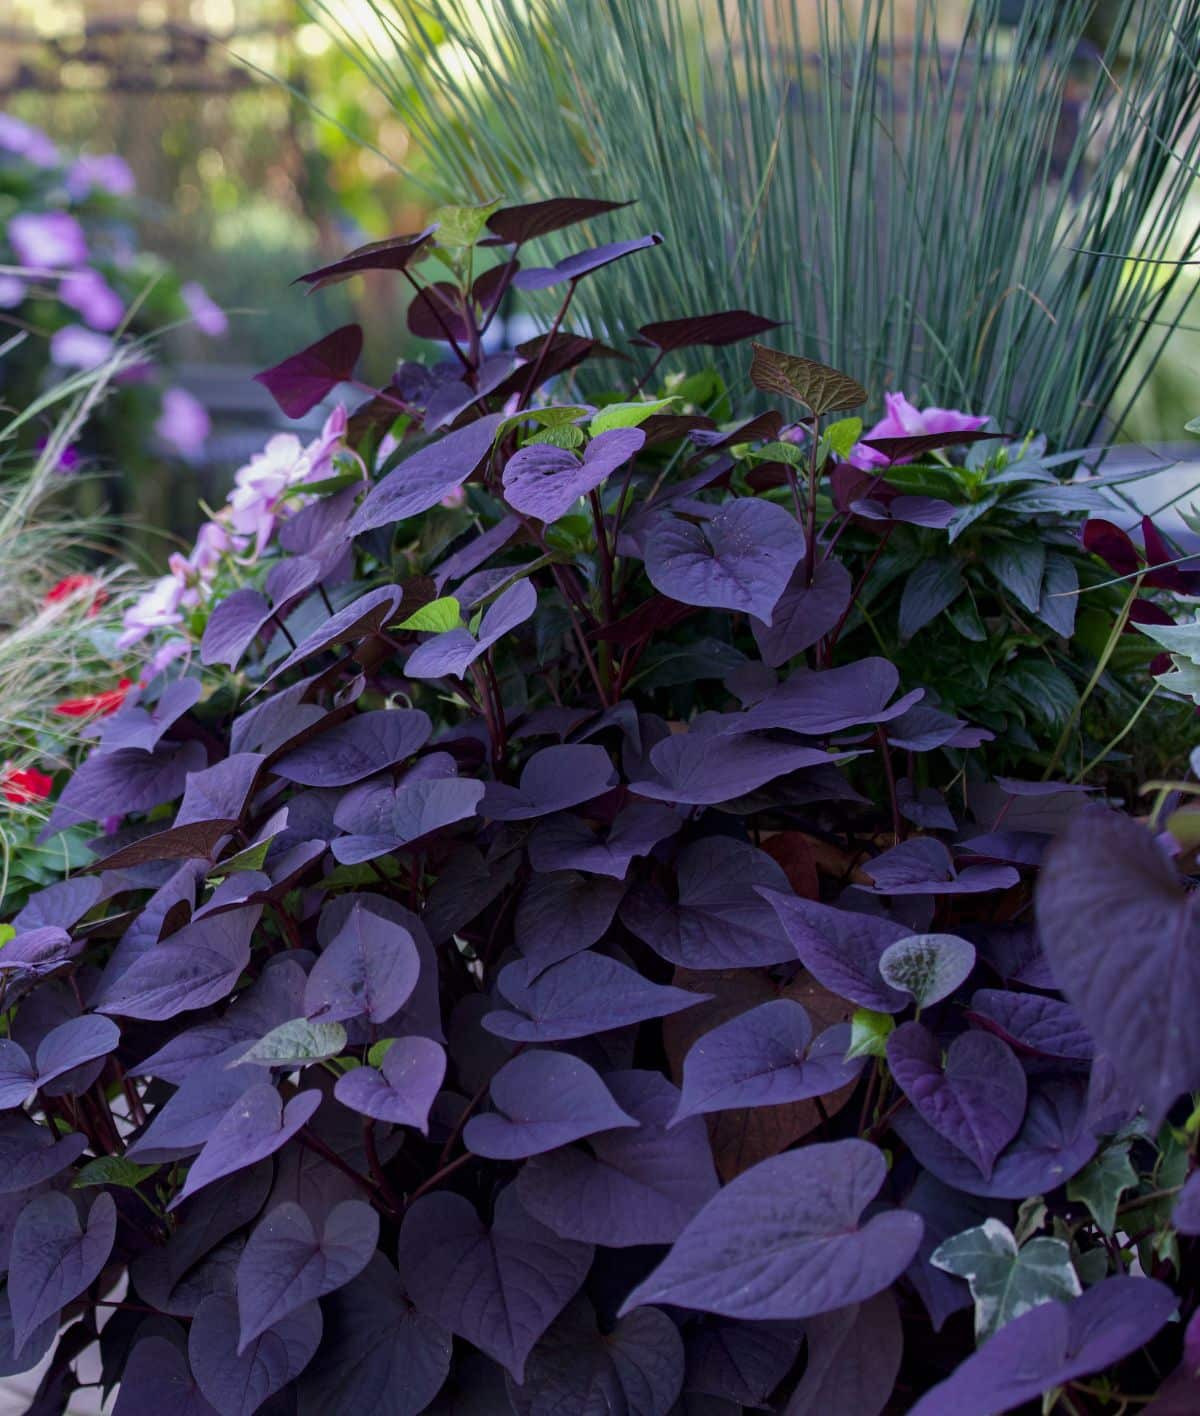 Plants with almost black foliage